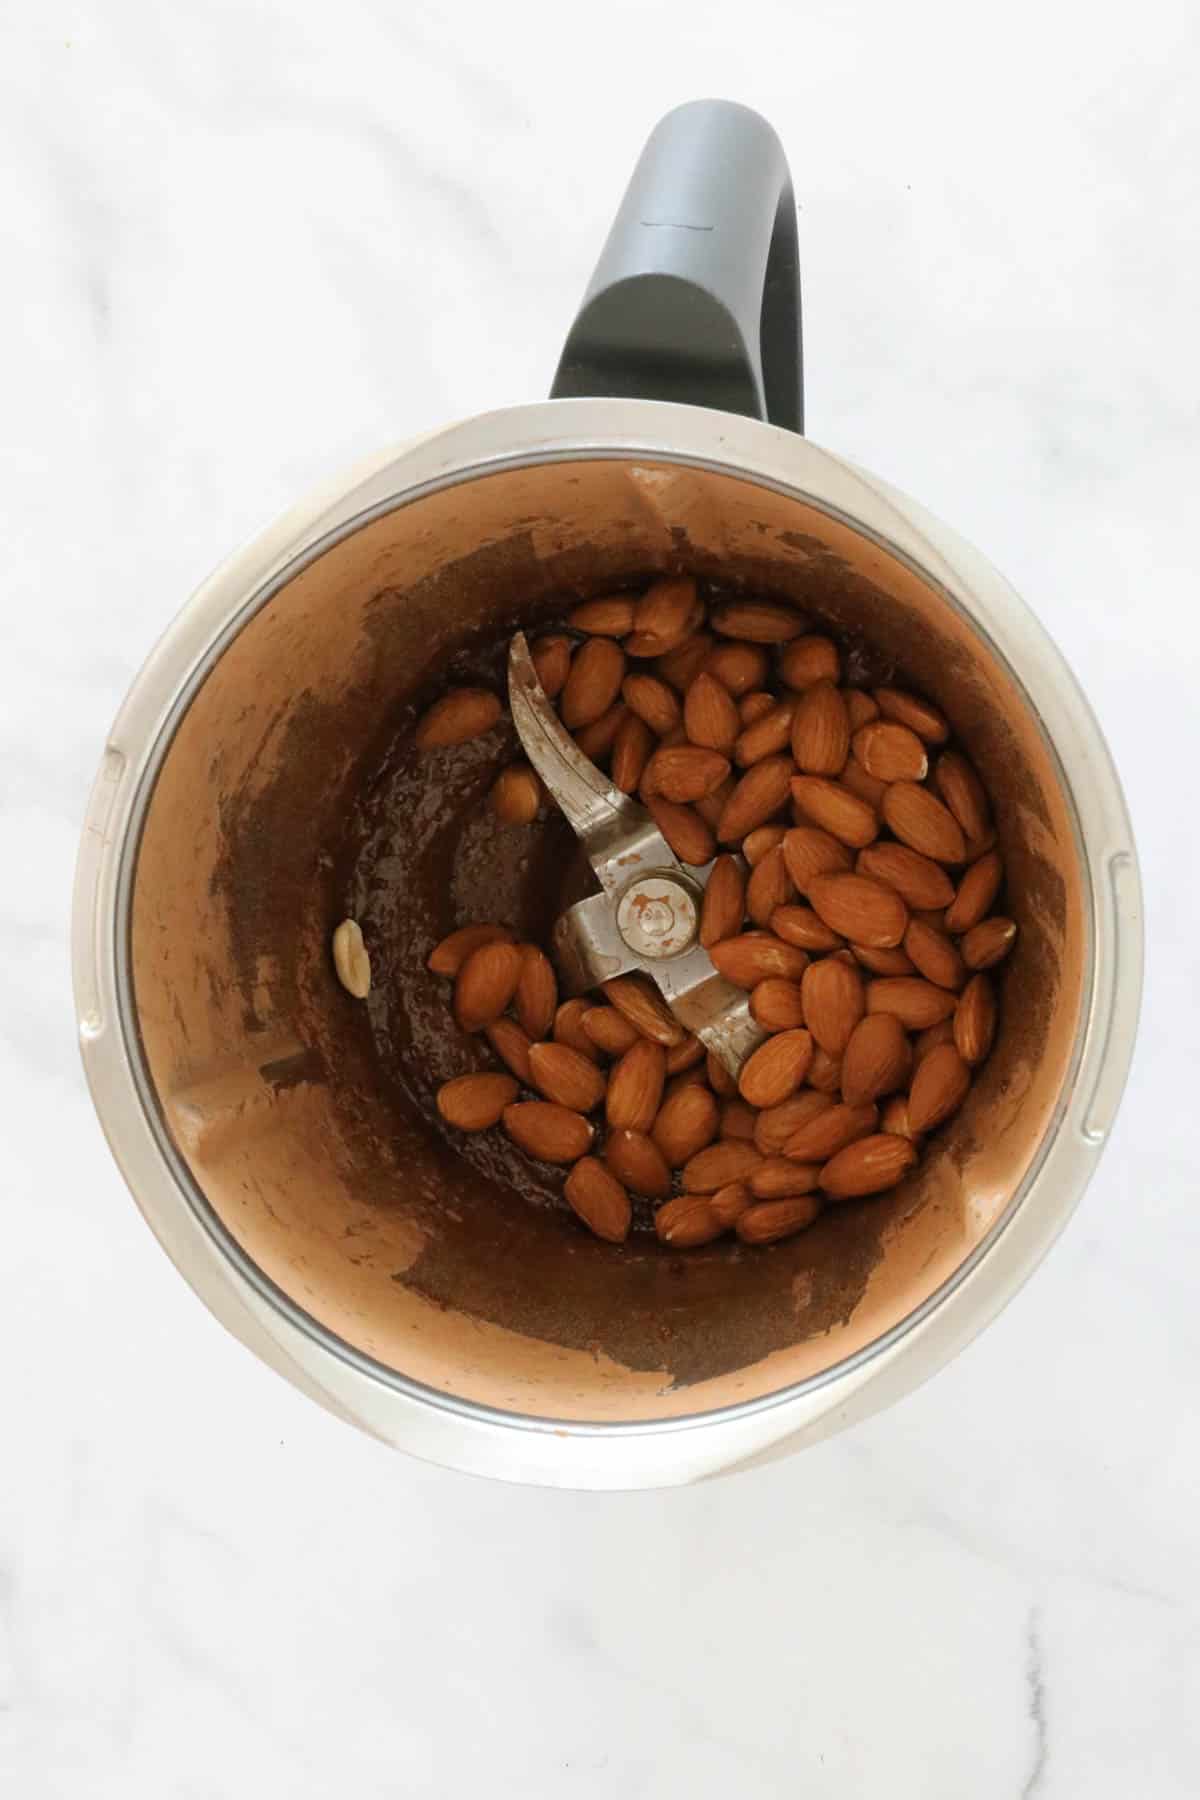 Almonds in a stainless jug.